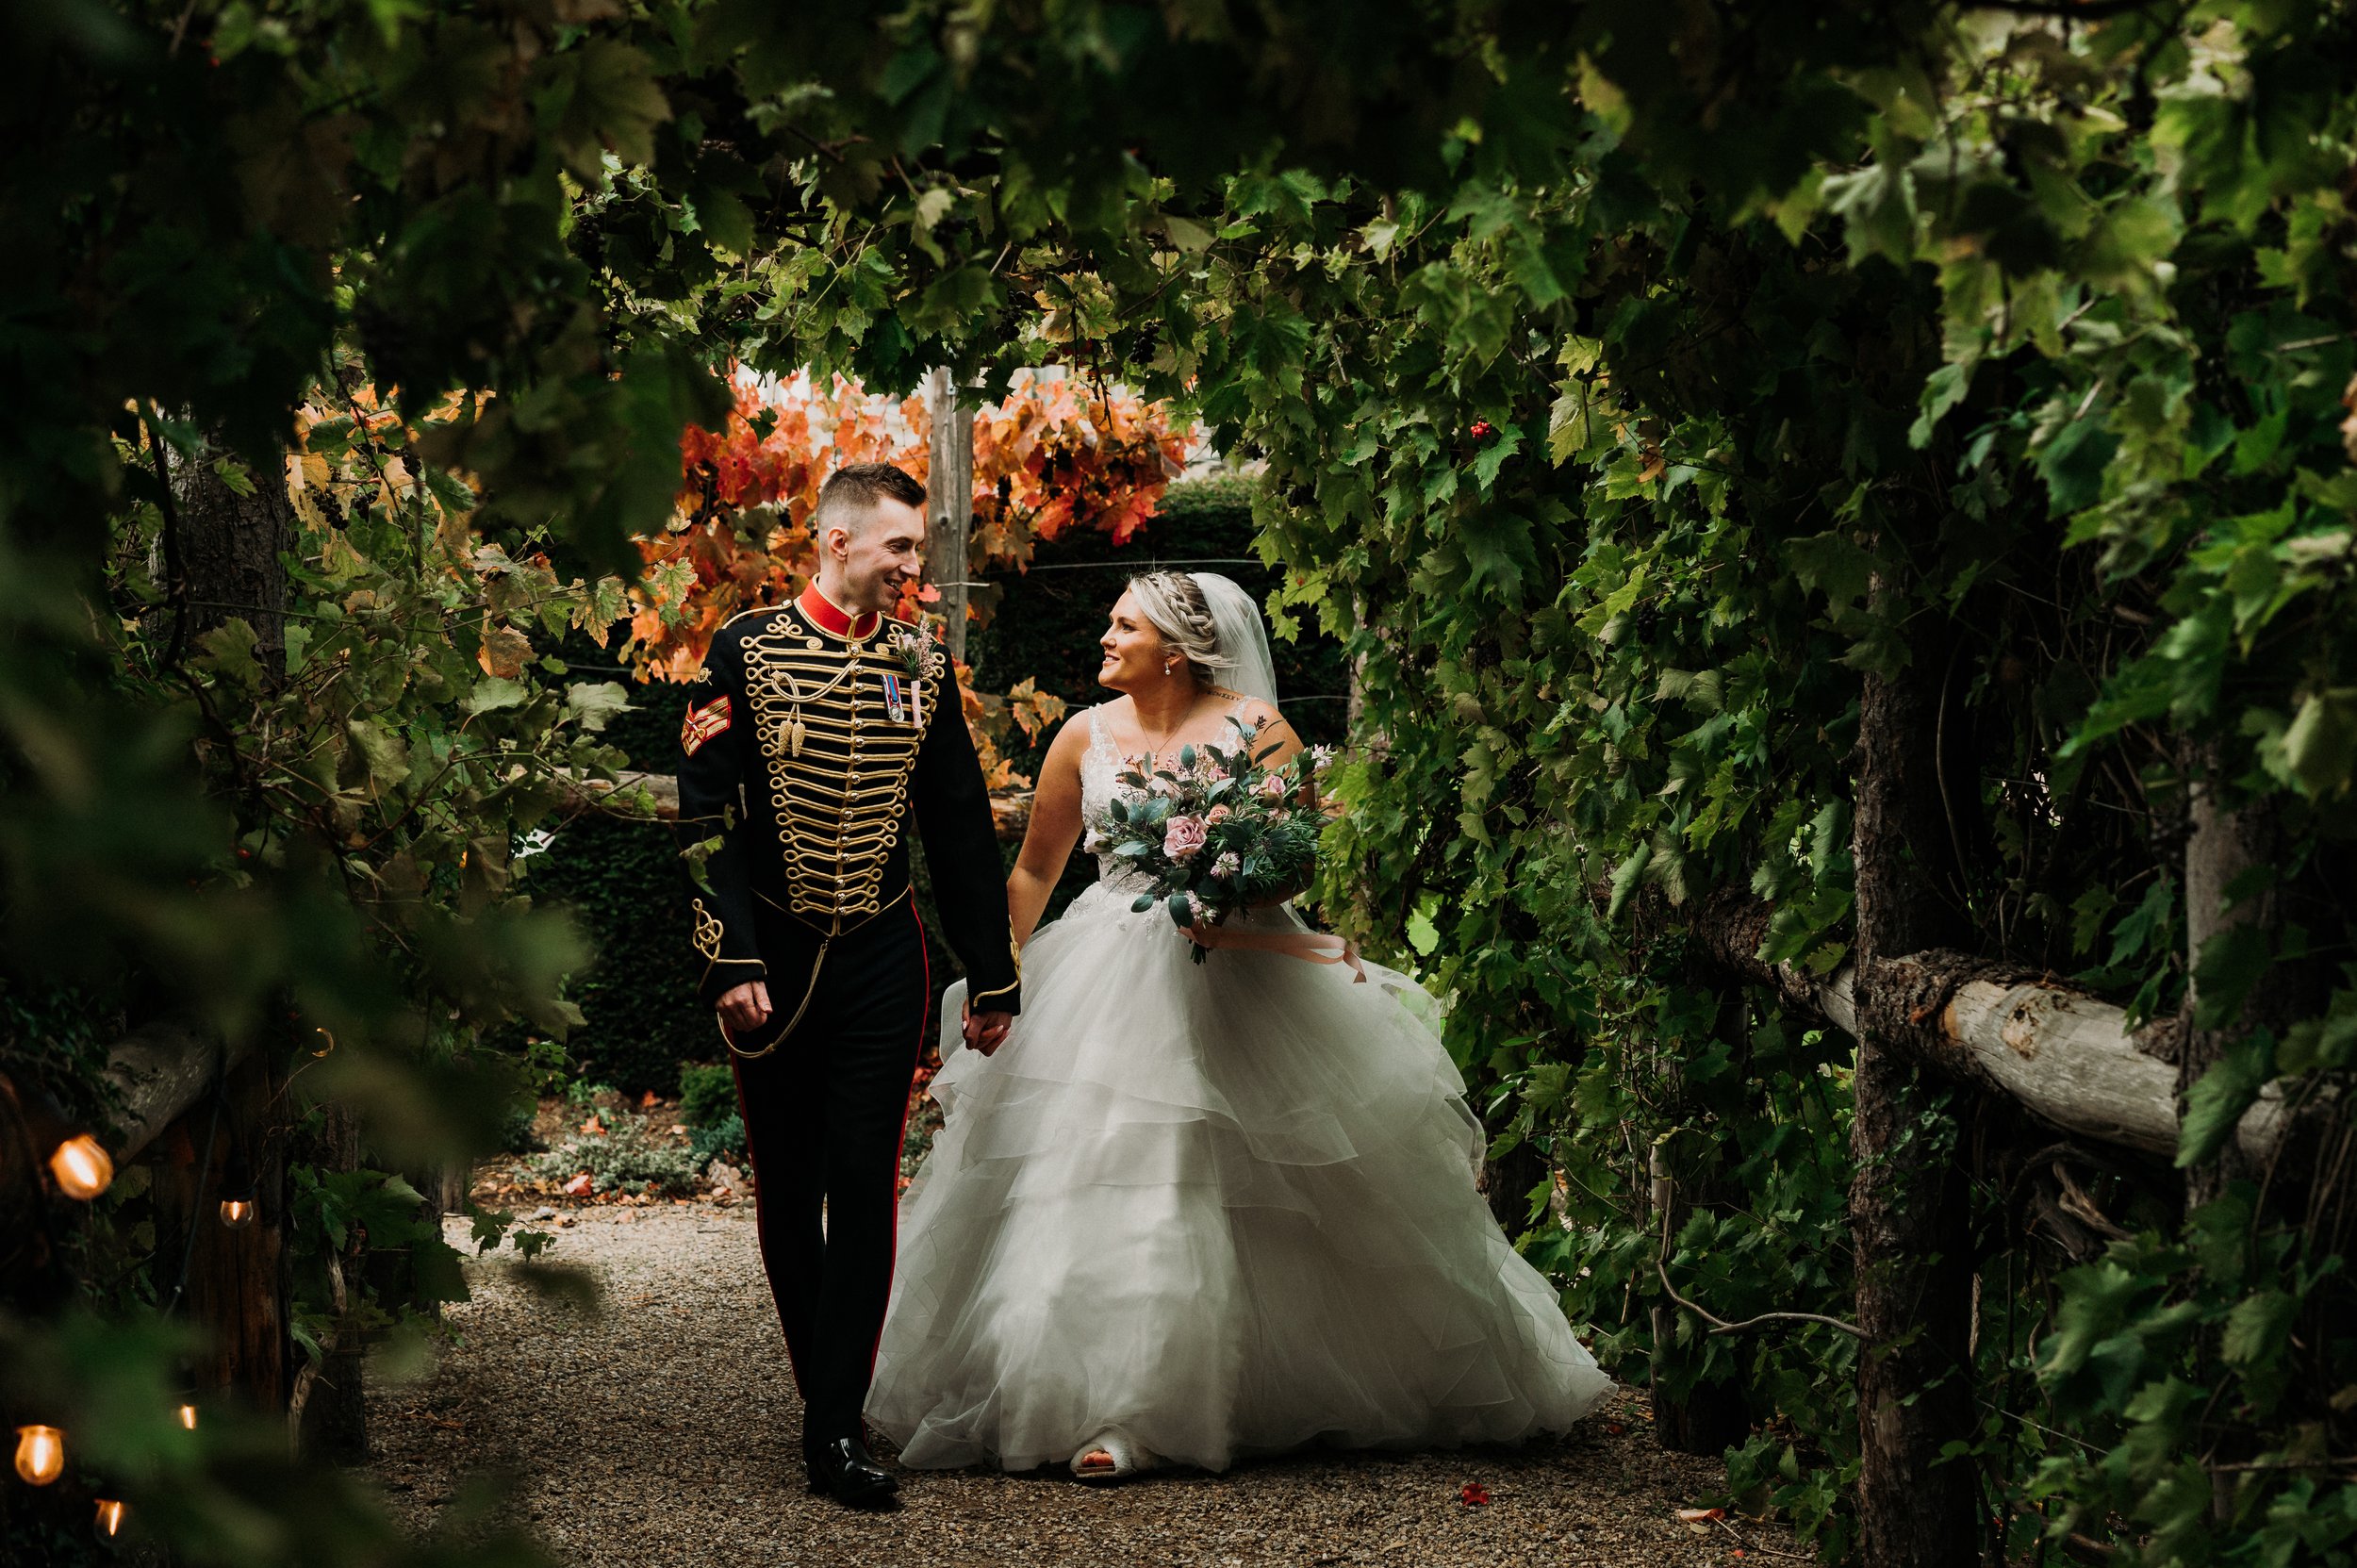 The bride and groom walk through a tunnel of leaves in the gardens at Sneaton Castle, Whitby.